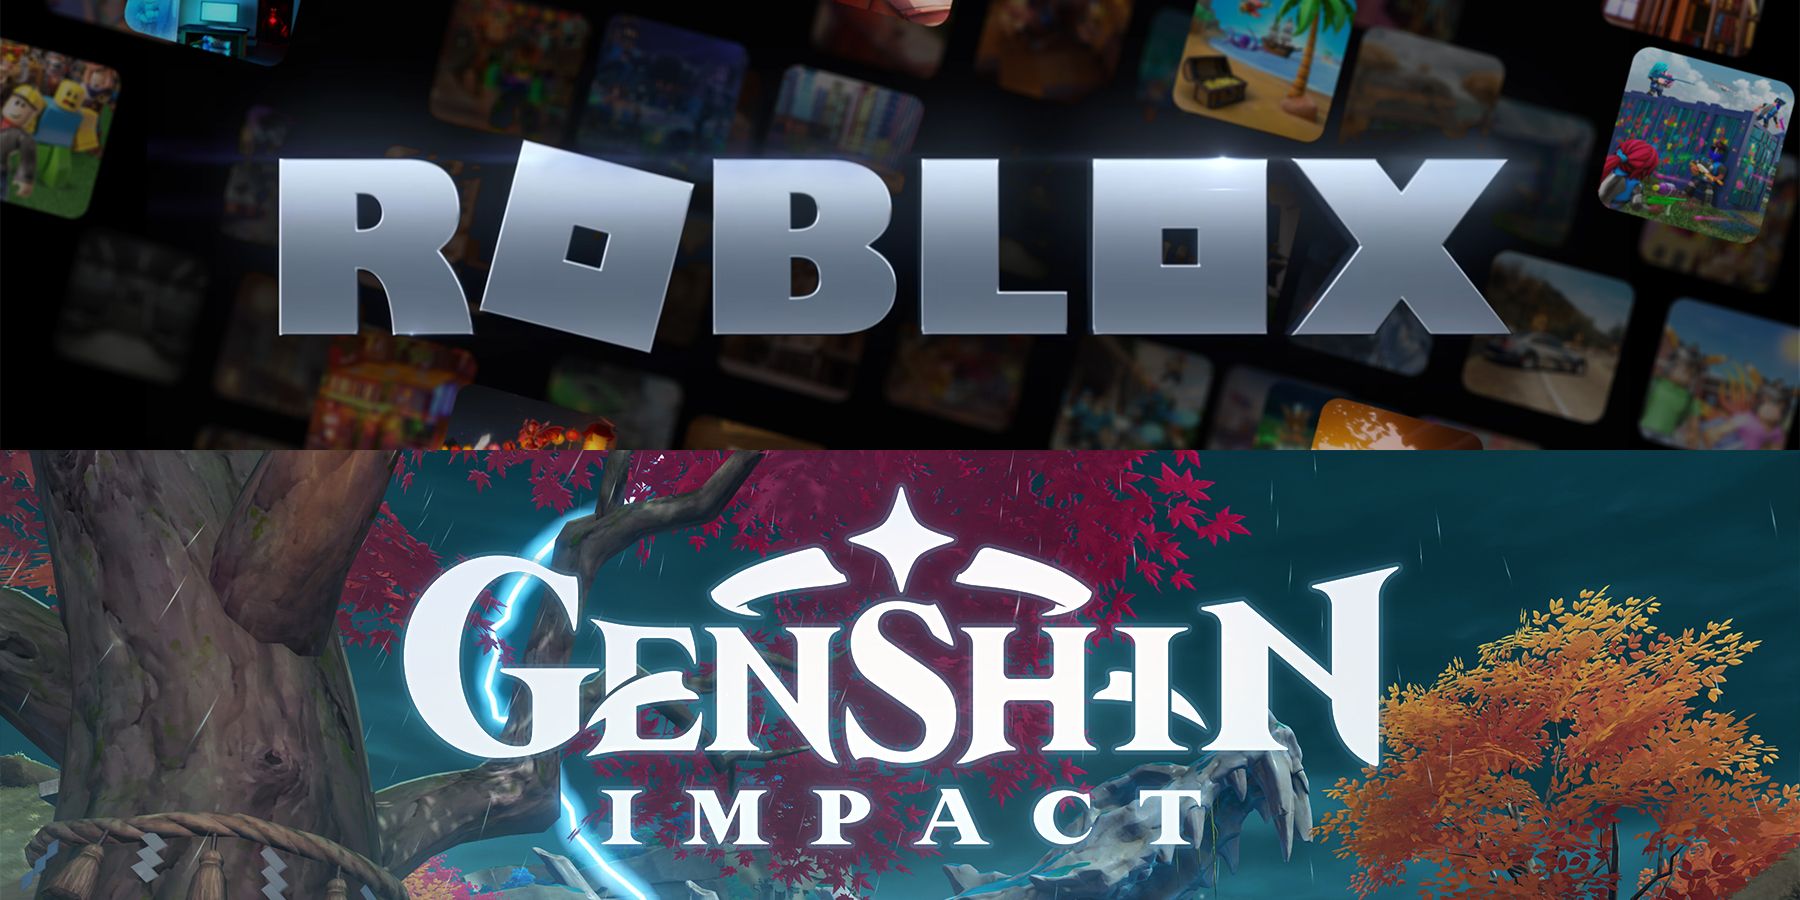 Roblox Genshin Impact Lead $17 Billion In Weekly Mobile Game Spending